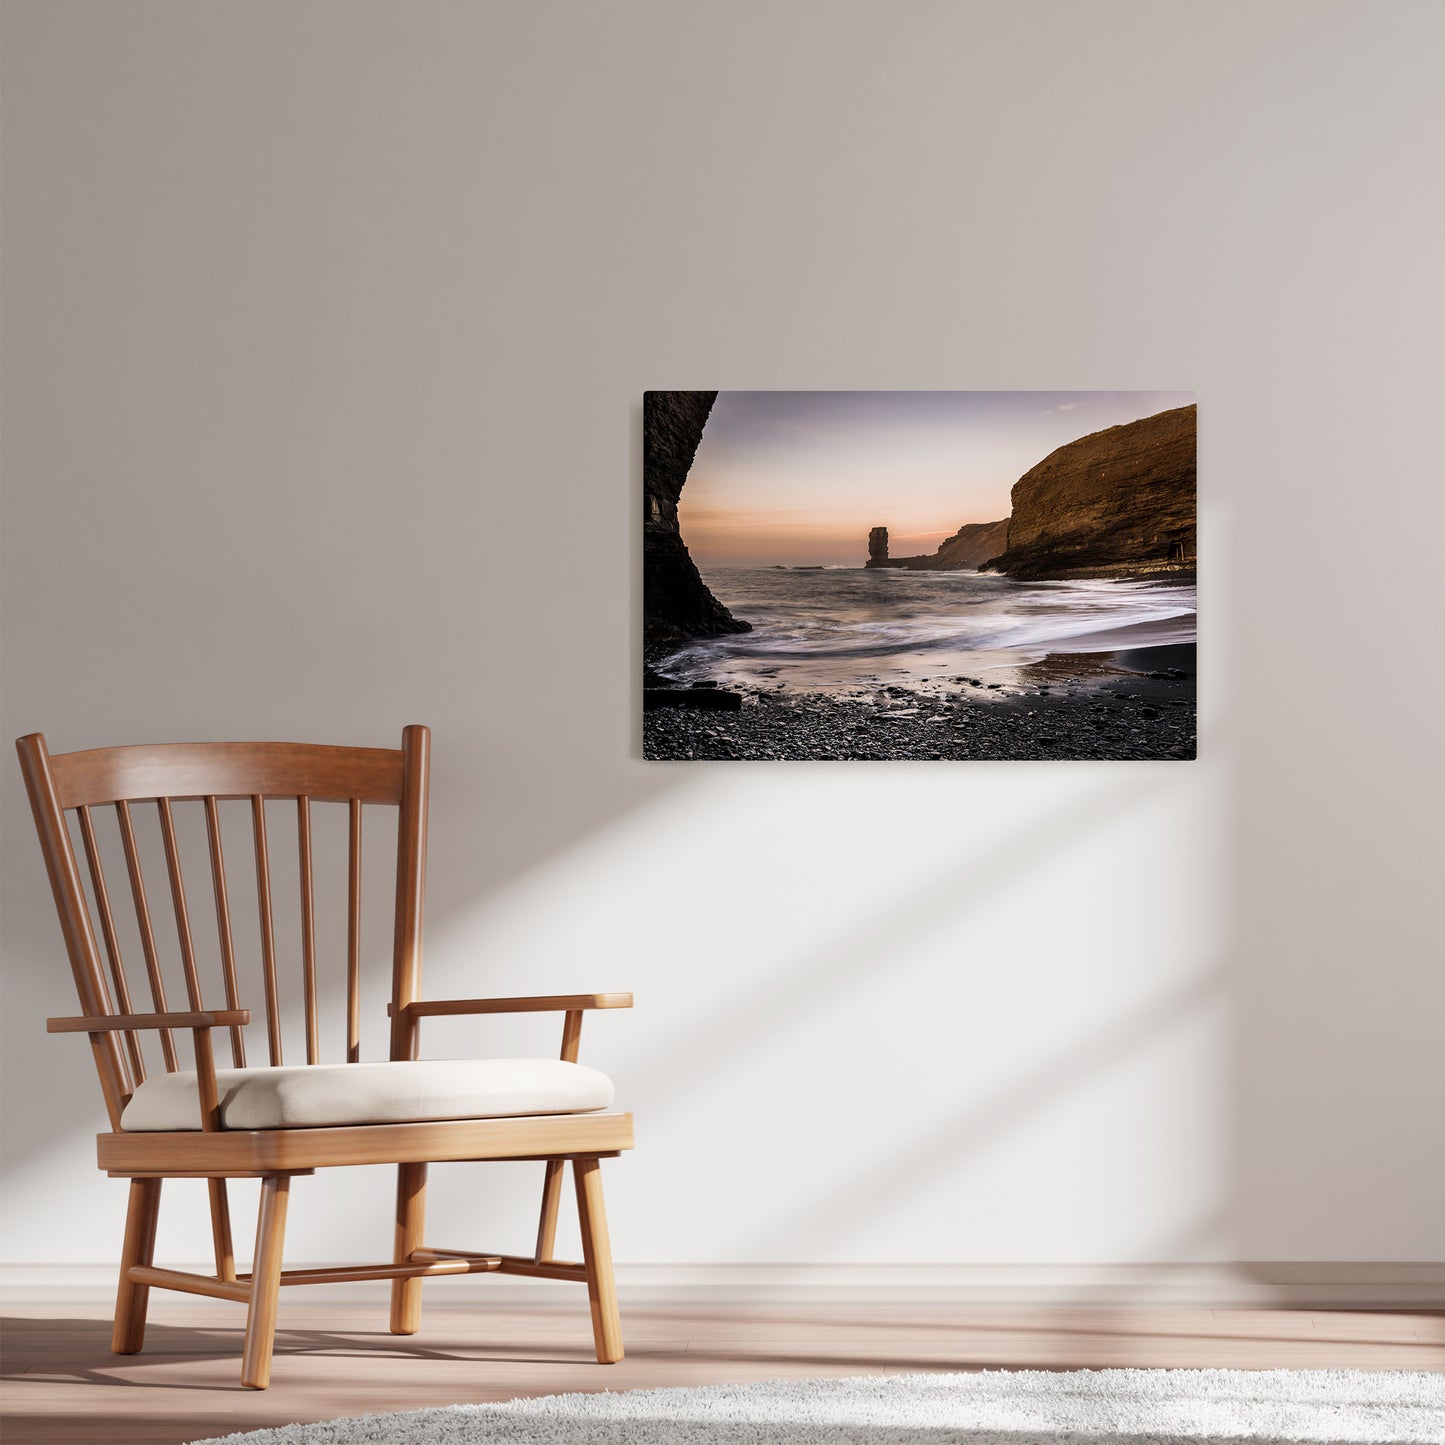 Ray Mackey's Grebe's Nest photography reproduced on HD metal print and displayed on wall